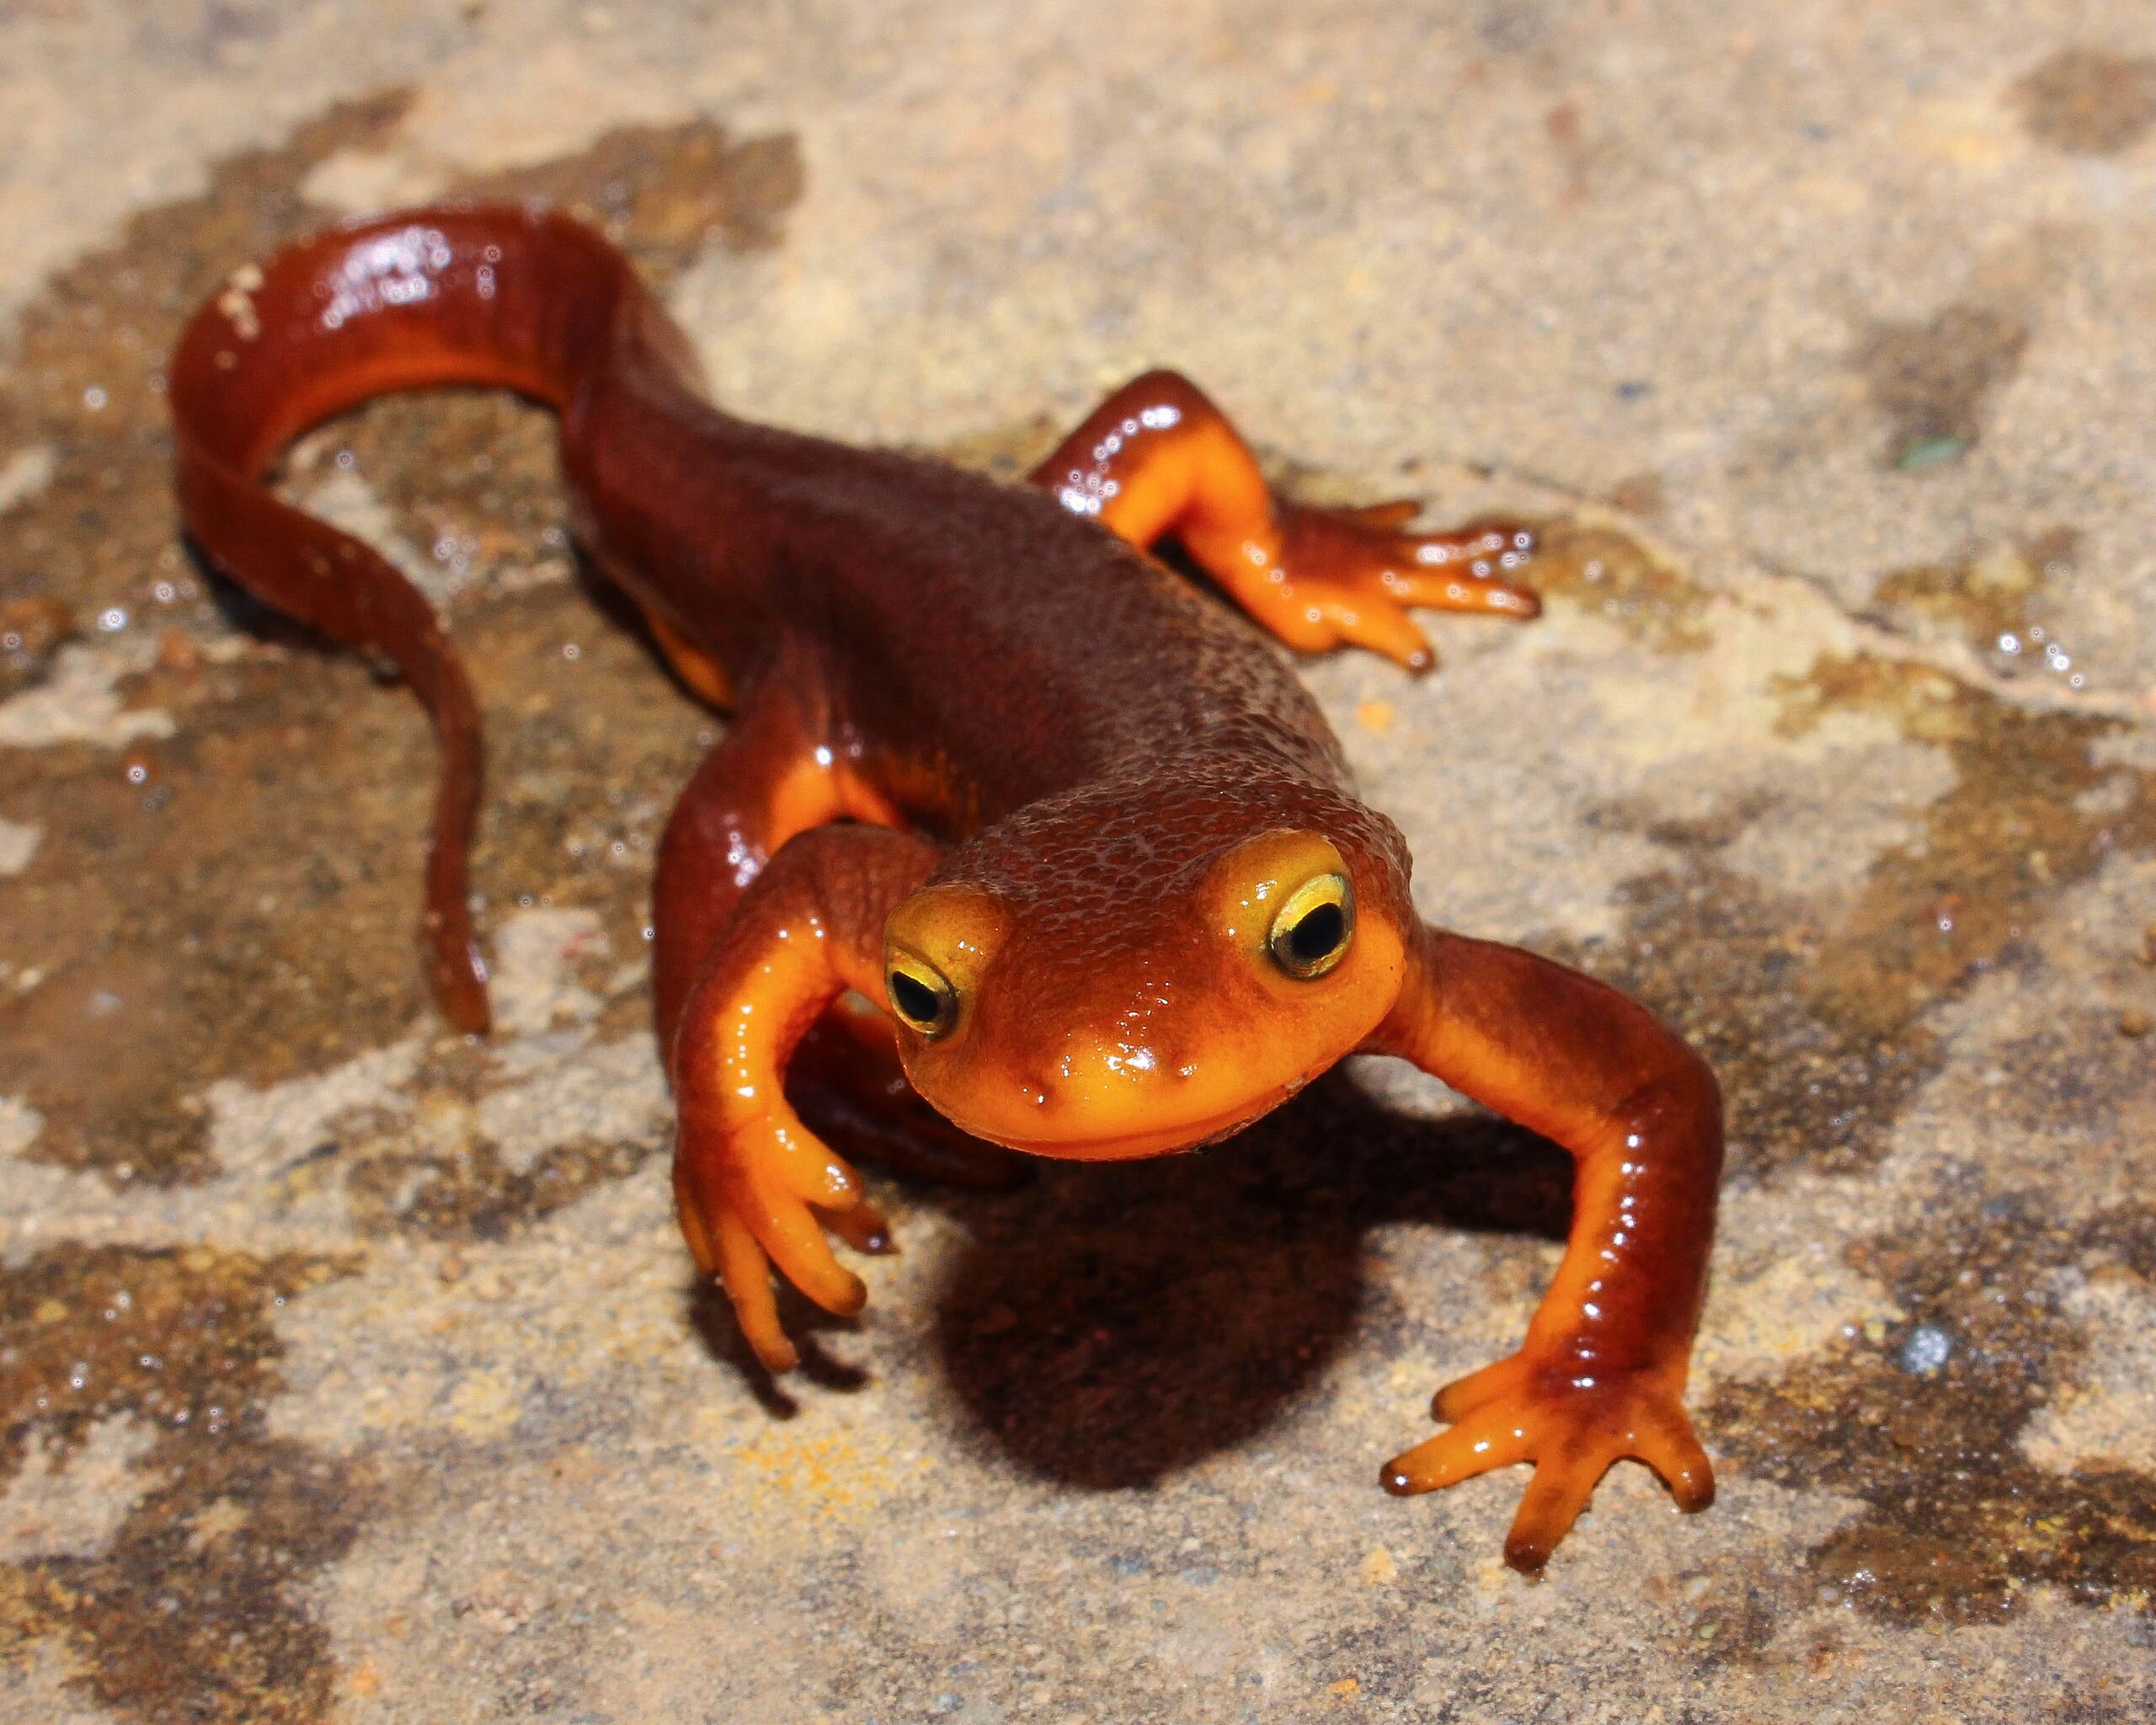 Female toxin-producing newts are surprisingly more poisonous than males